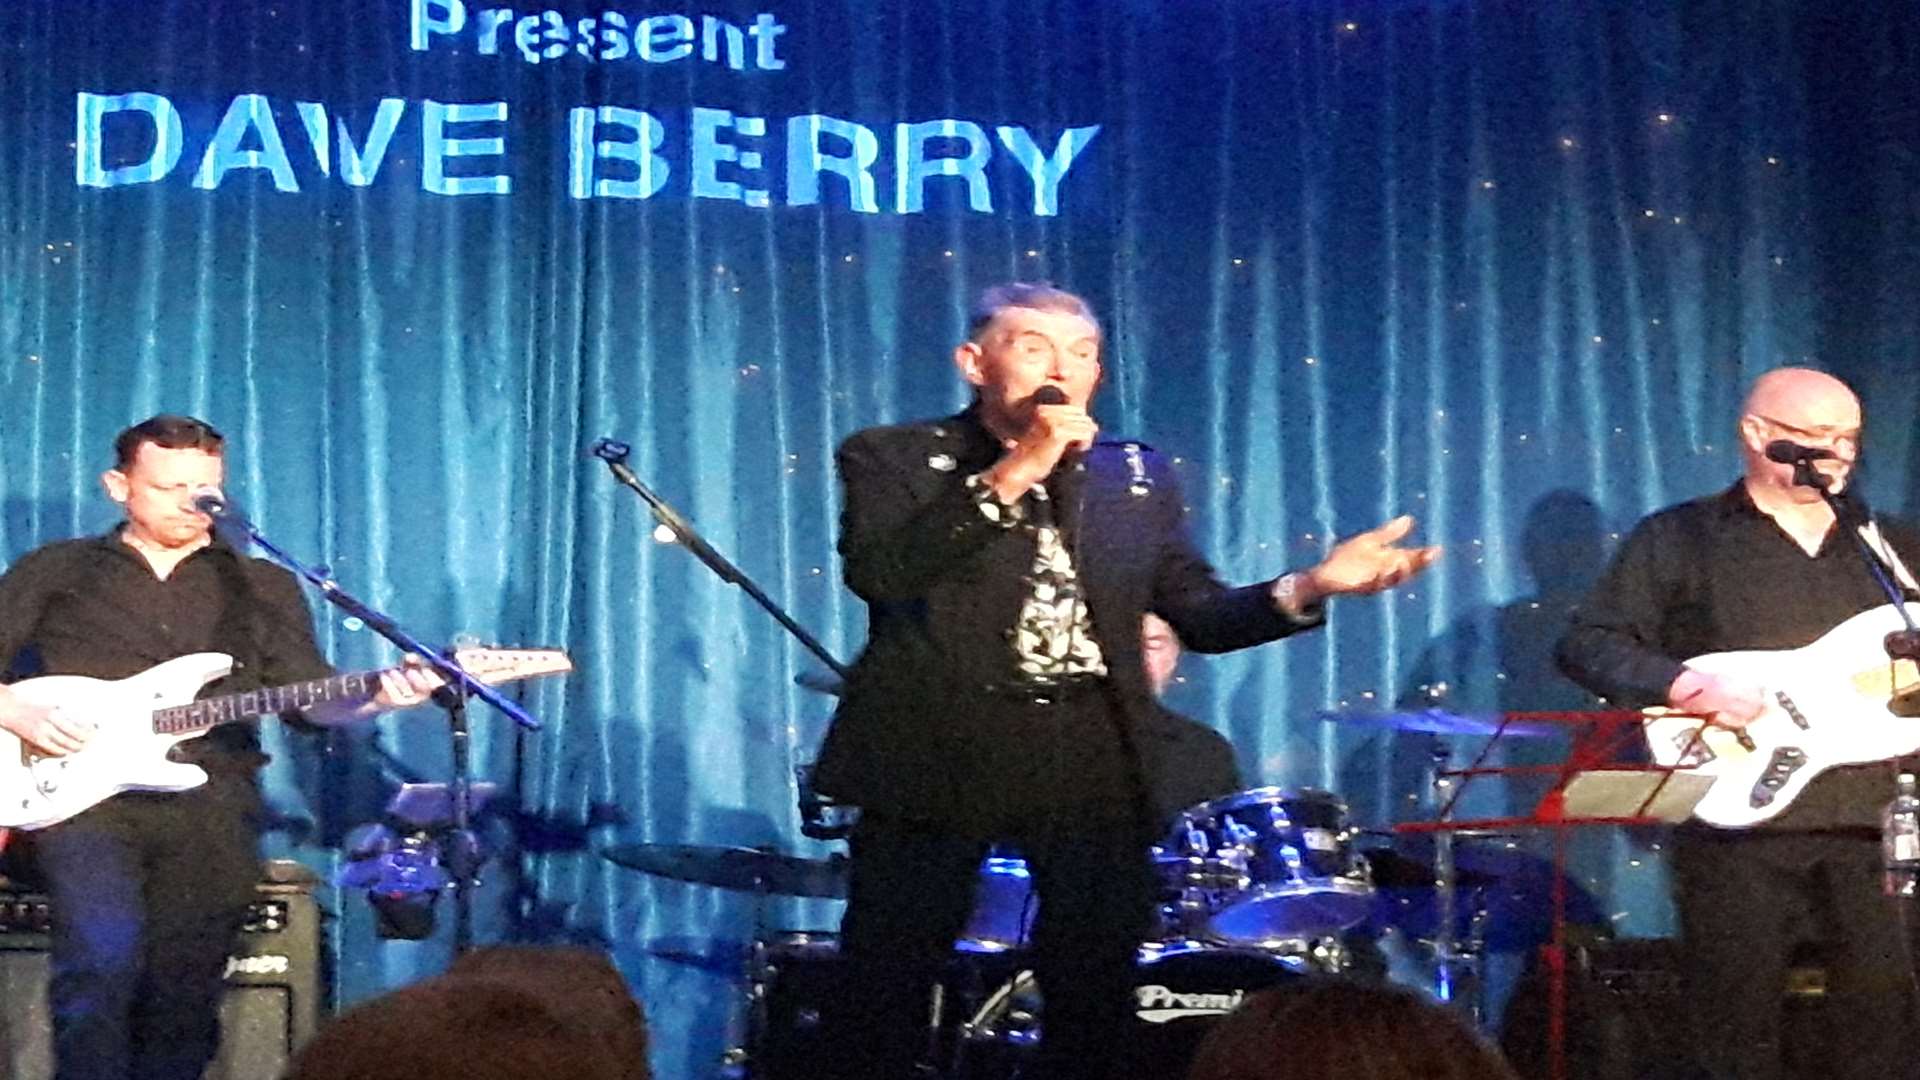 Dave Berry at the Criterion Theatre, Blue Town